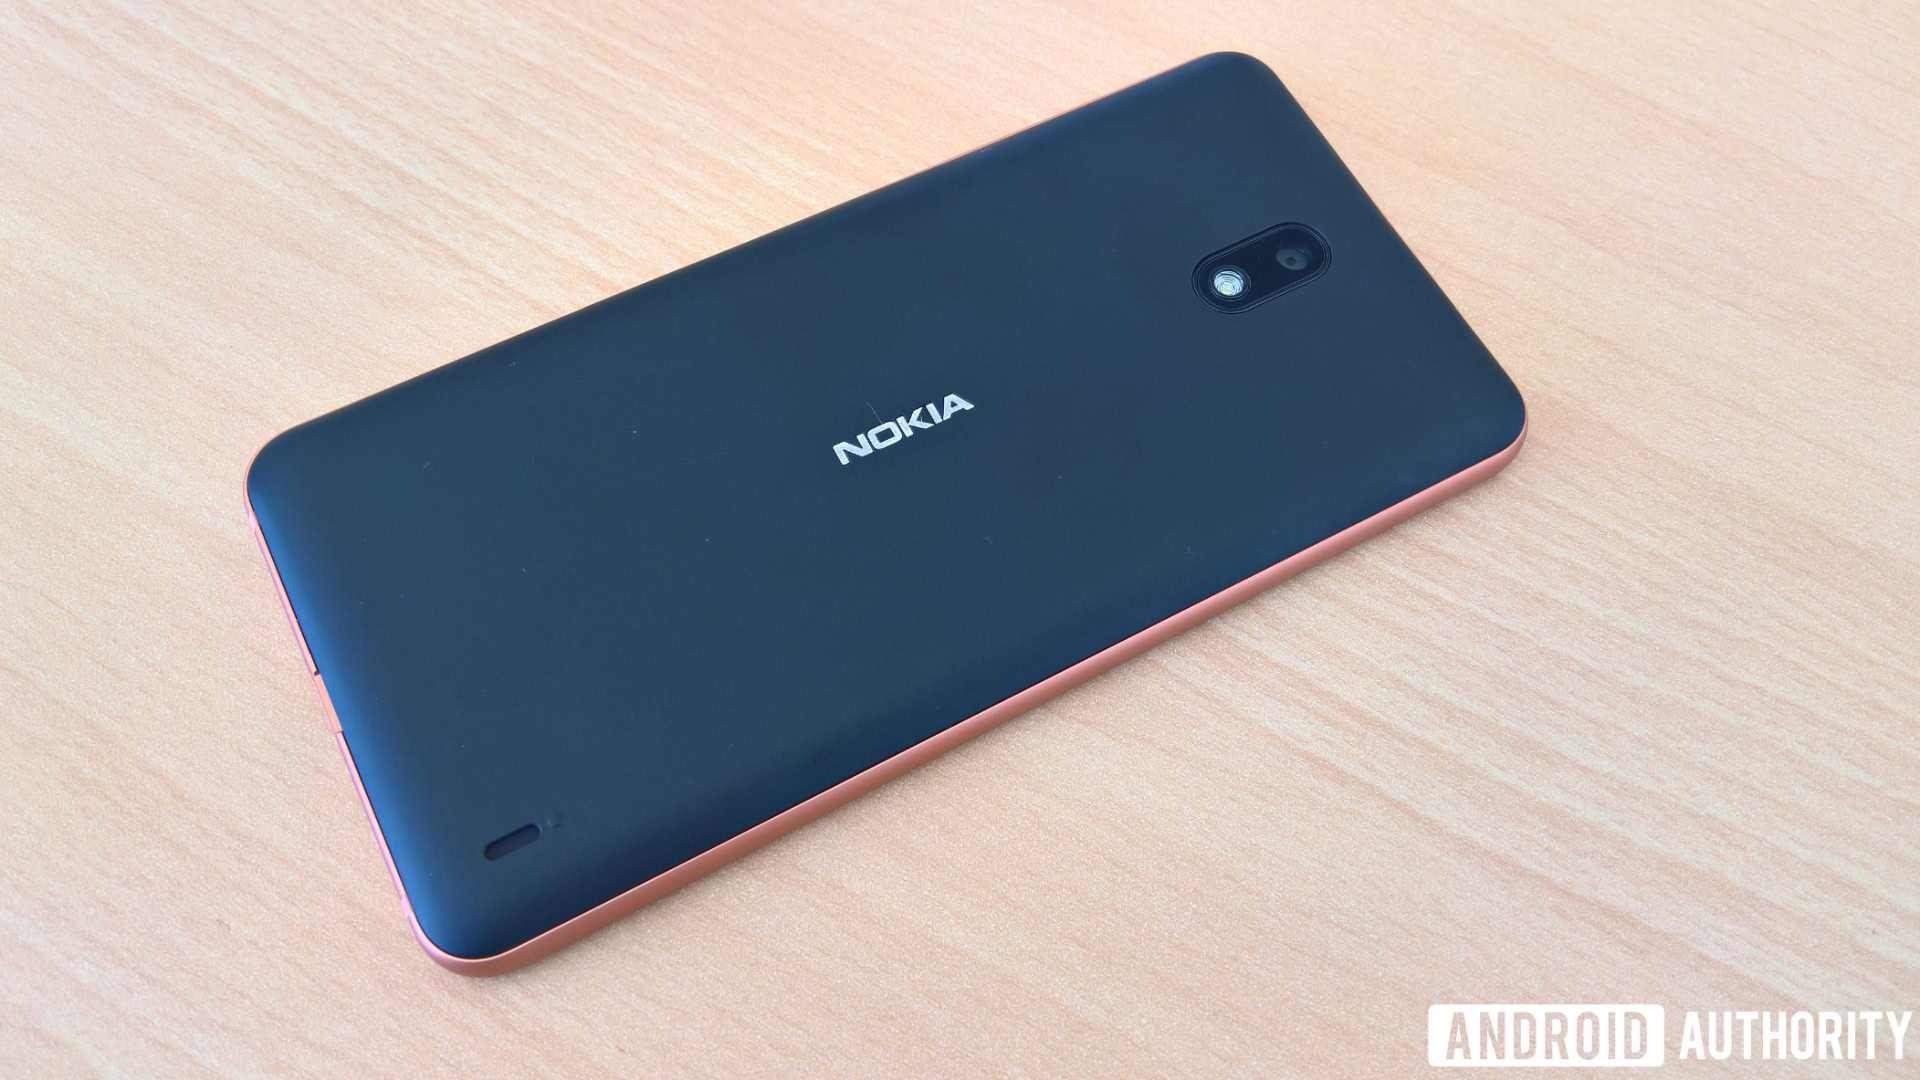 Nokia soars to #11 smartphone brand globally - Android Authority